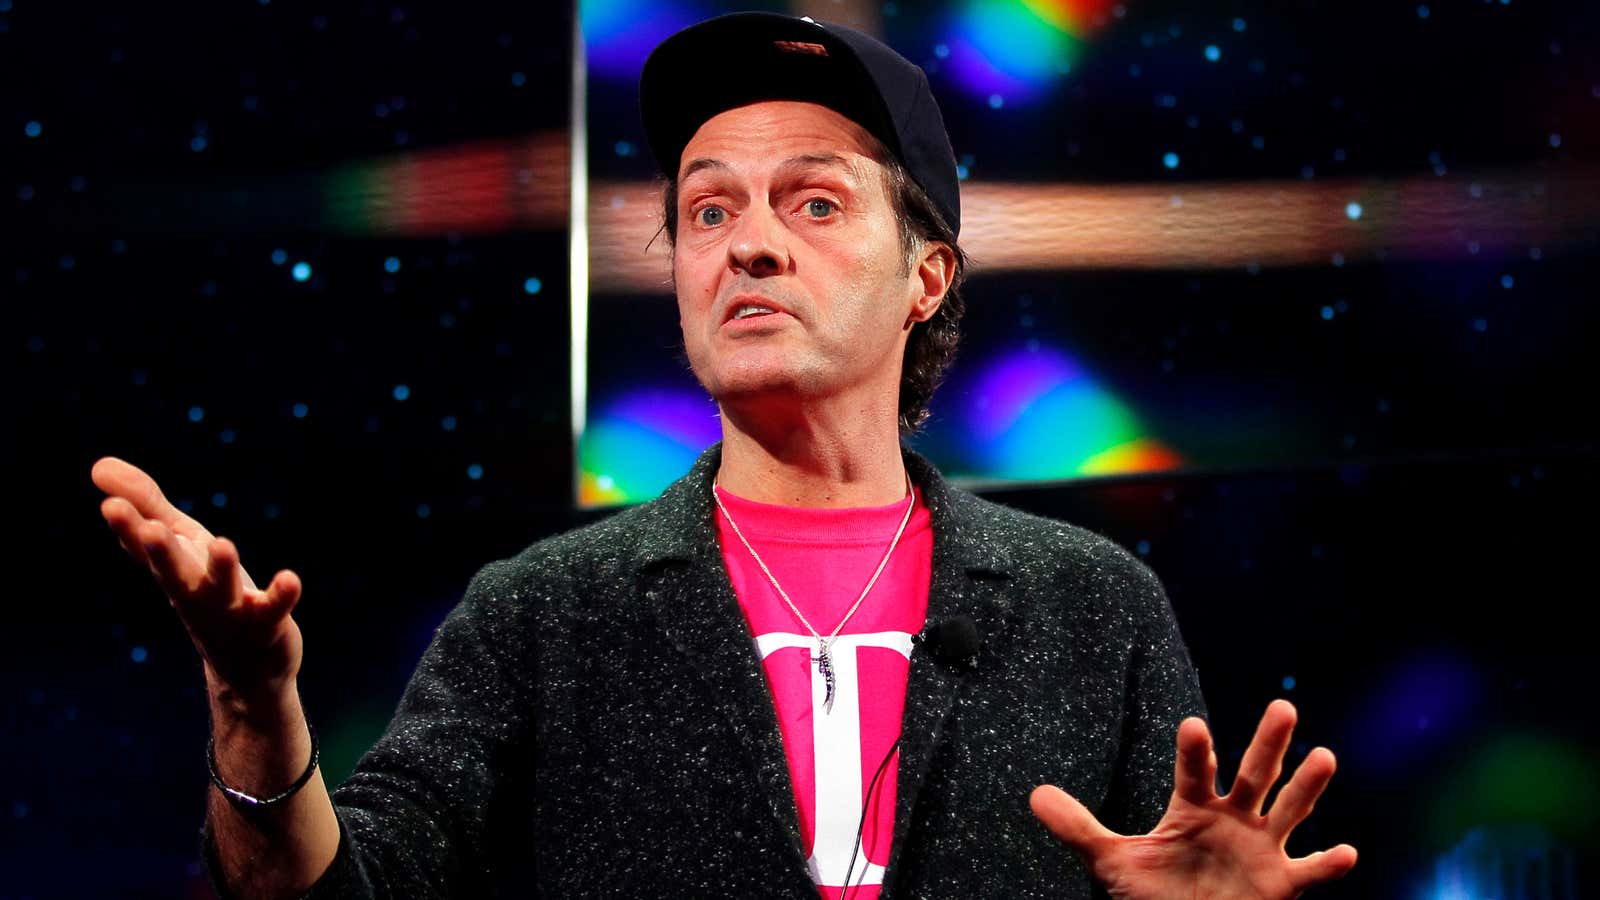 T-Mobile CEO John Legere’s iPhone aspirations haven’t gone according to plan.